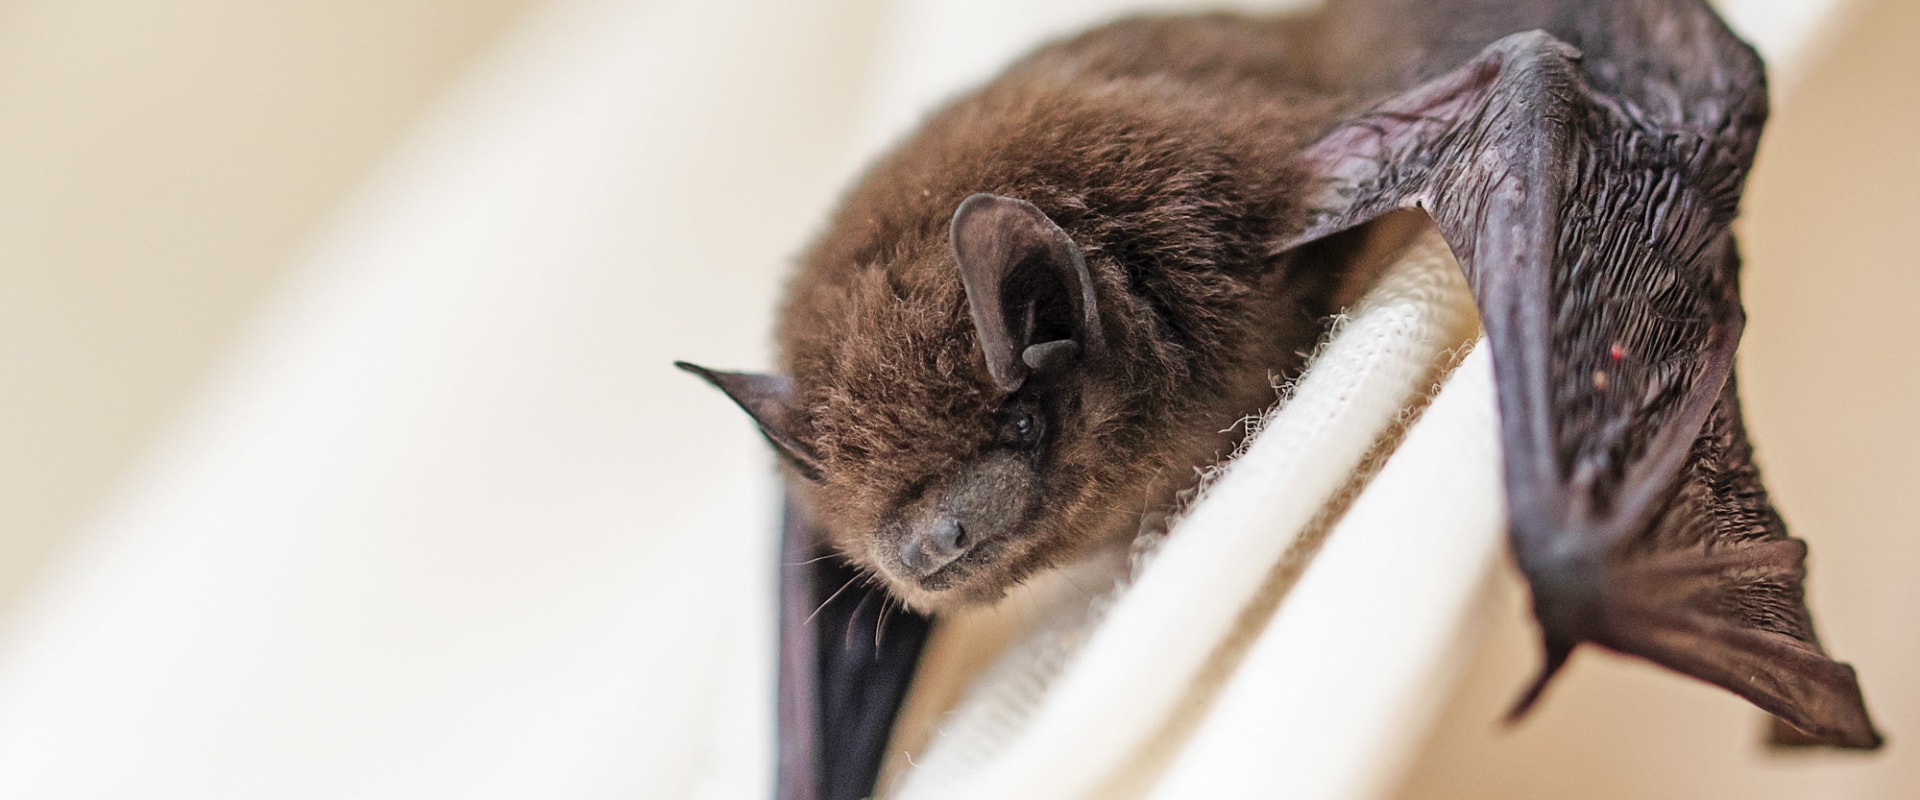 Getting Rid of Bats in the House: Expert Tips